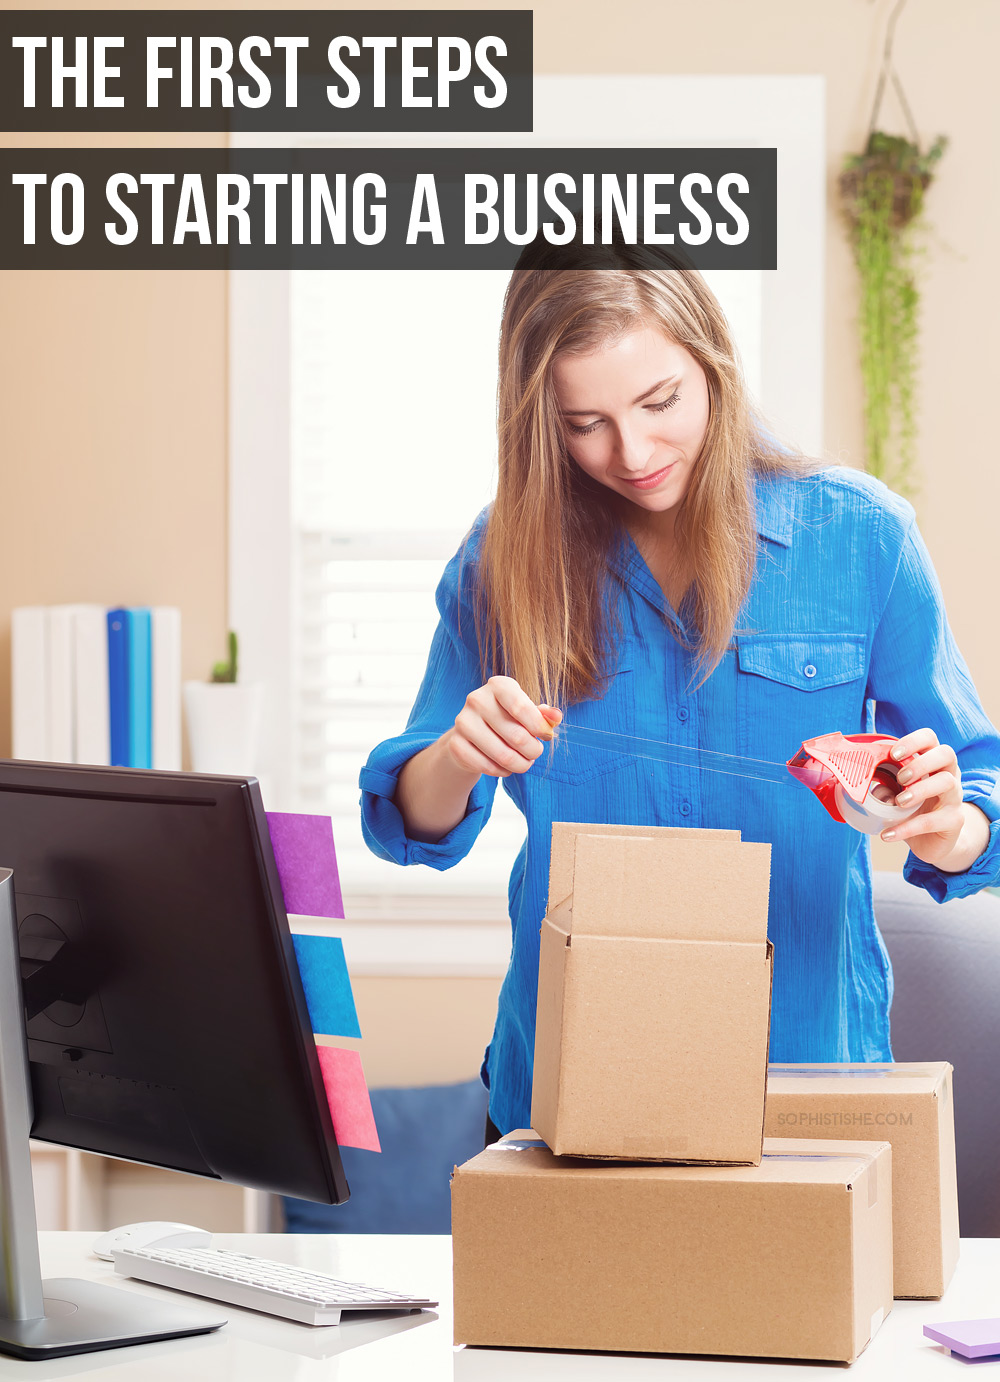 The First Steps to Starting a Business